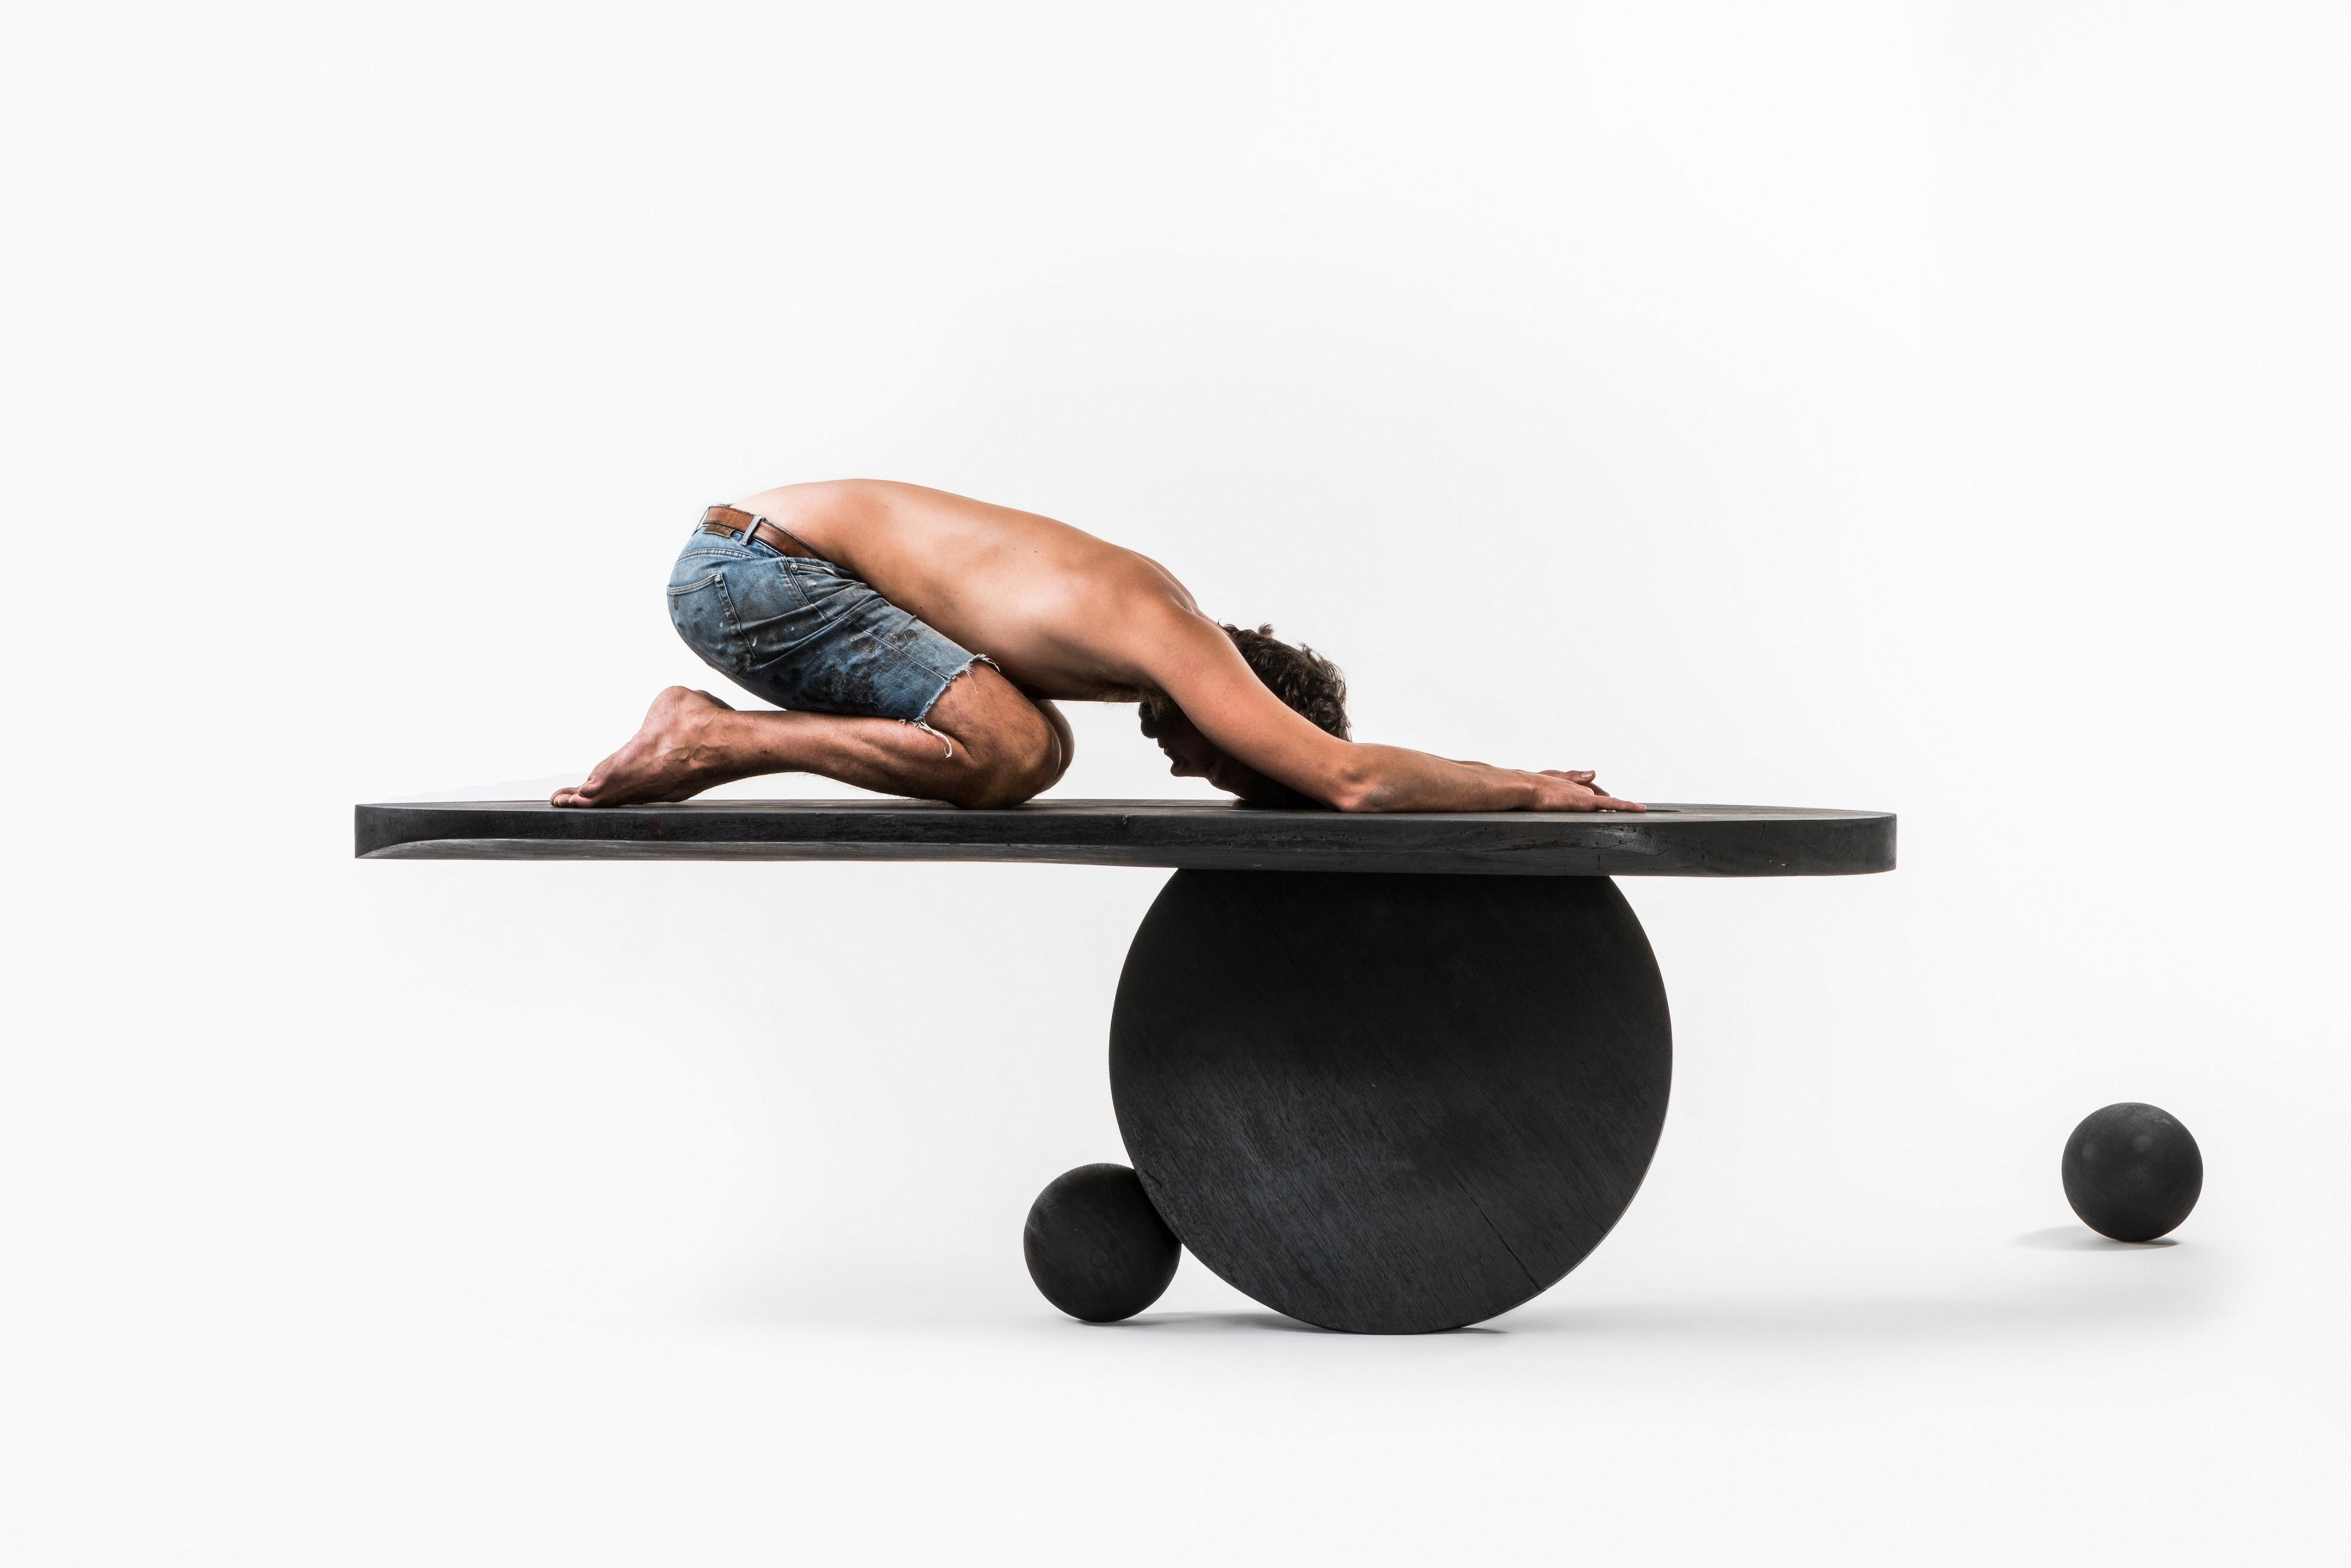 Geometry 0.3 Contemporary Table by Mircea Anghel is an exercise of shape and balance with curved objects. The design and making process sought composition and equilibrium, while providing a piece of furniture which standouts for its smooth